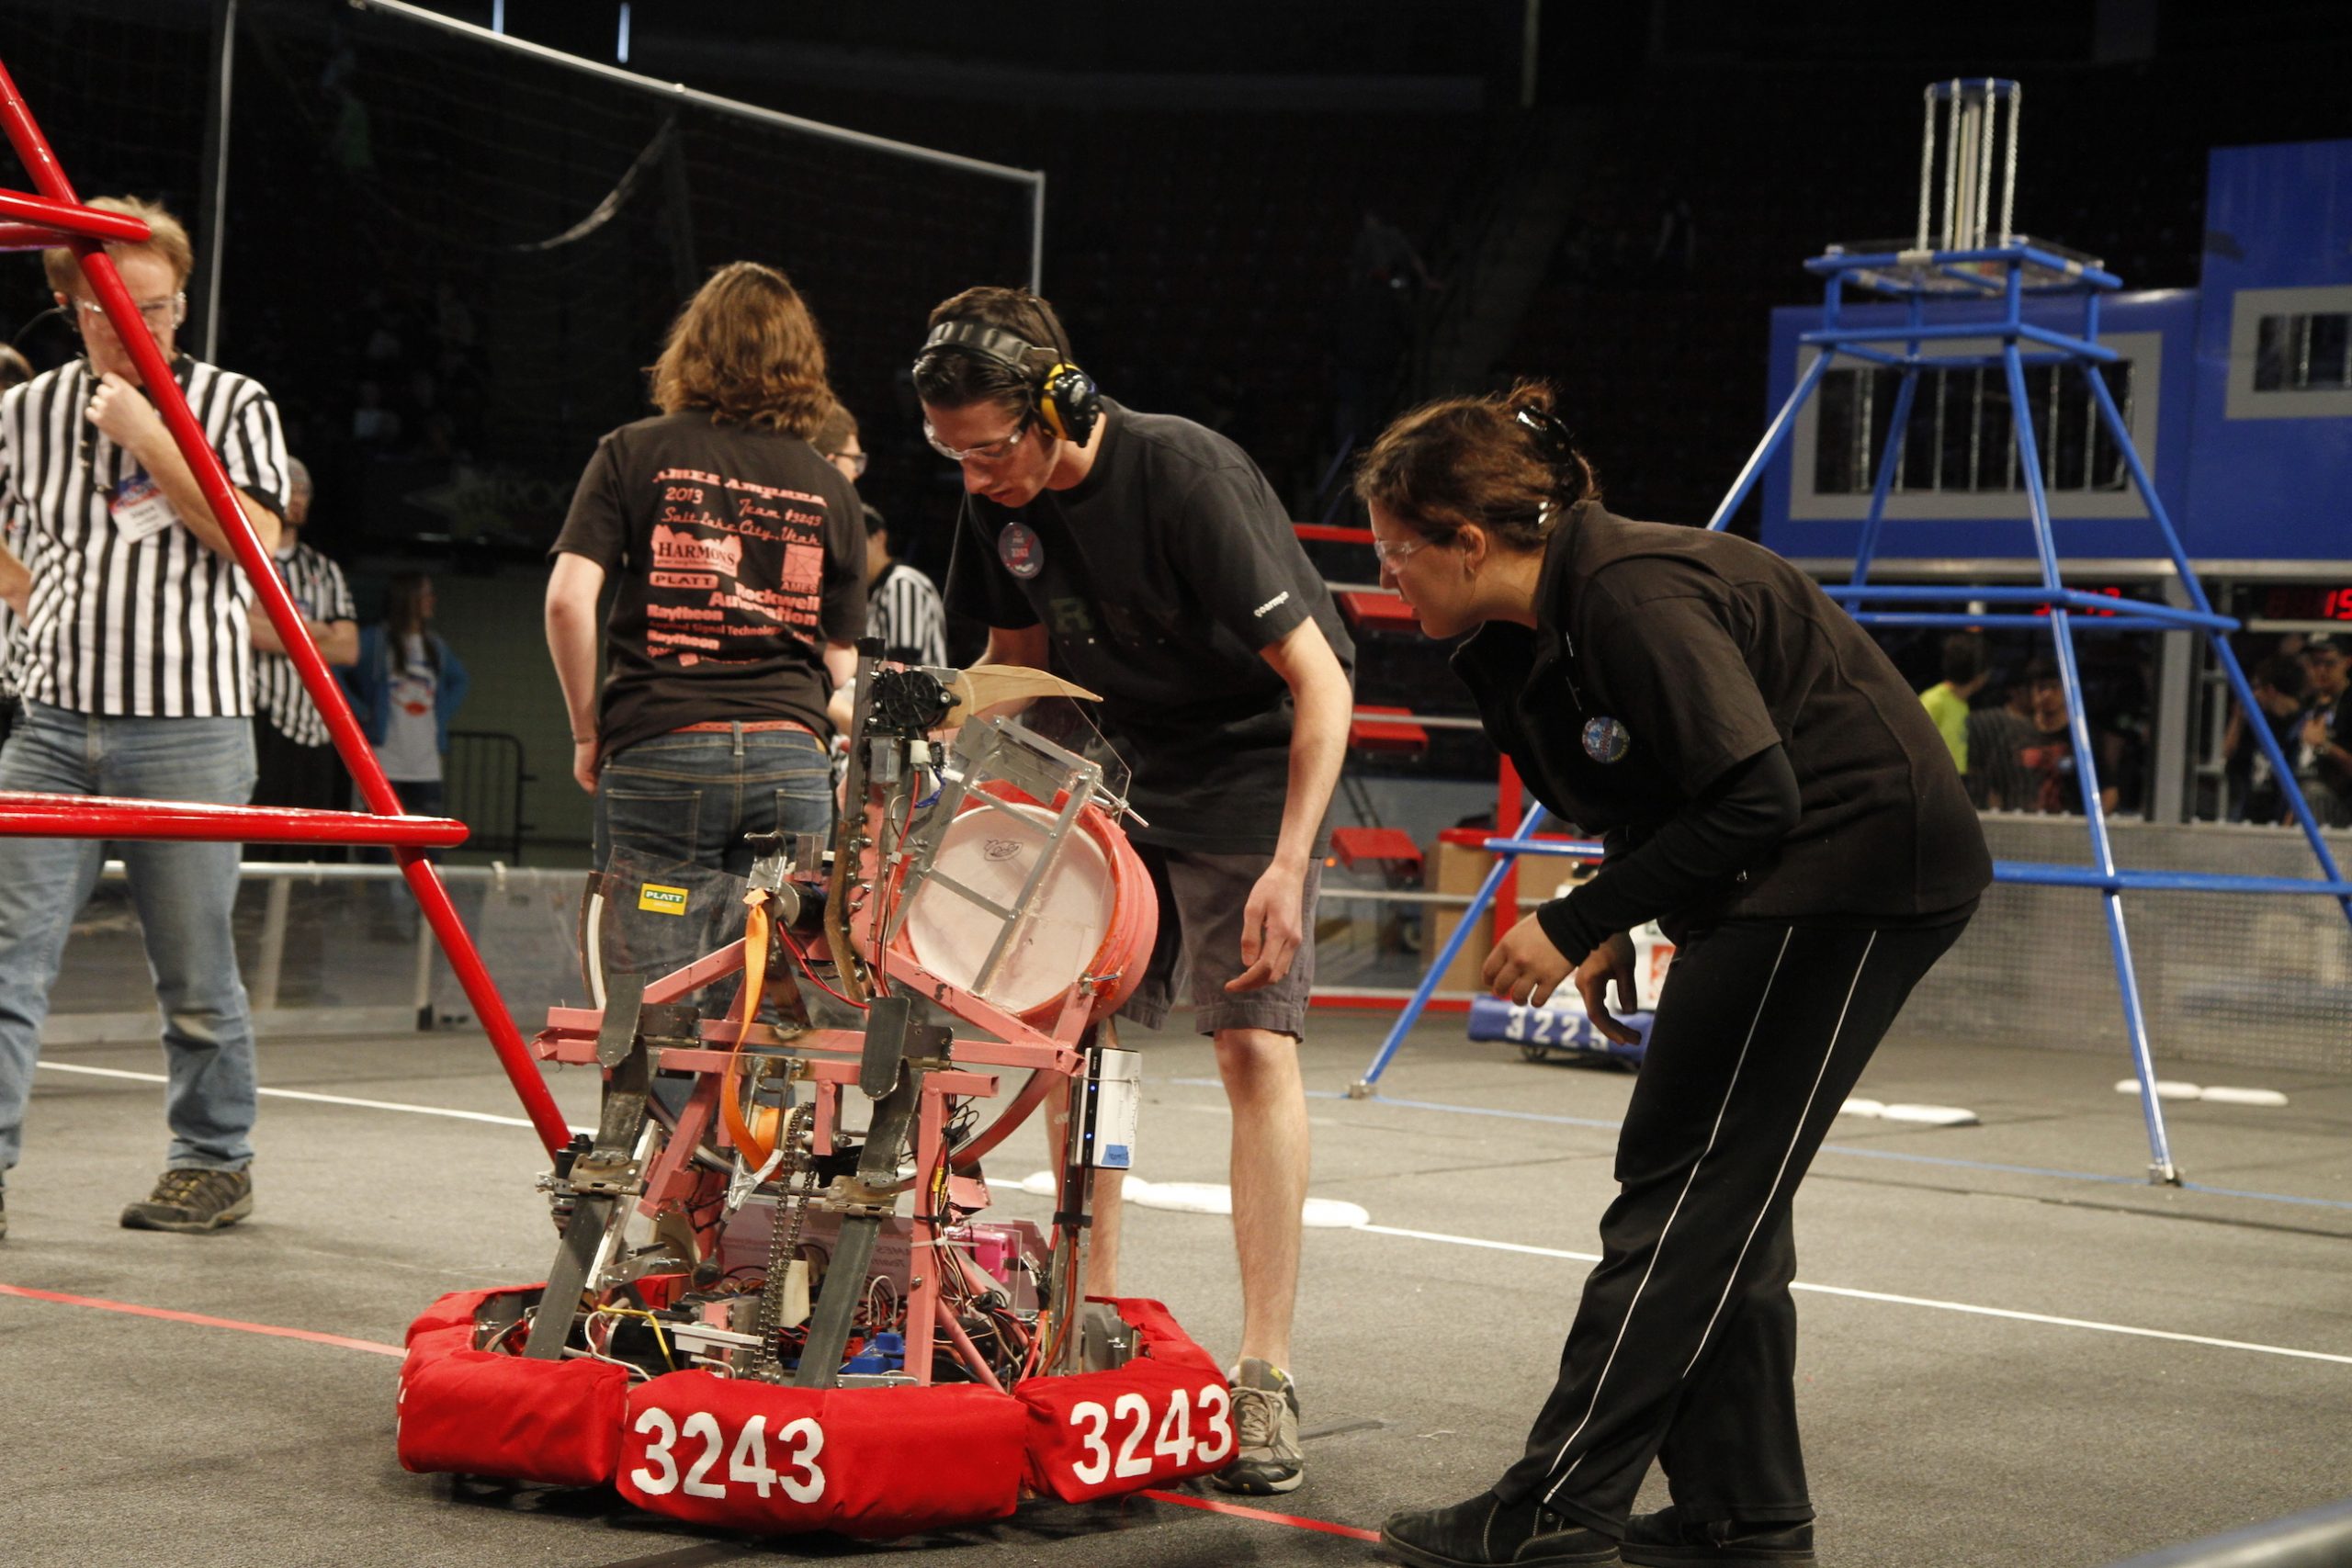 Student robotics developers from around the western U.S. and Canada are competing at the Maverik Center in West Valley City March 13 and 14 in the annual Utah Regional FIRST Robotics Competition. In this year's "Recycle Rush" contest, students design and build robots that process recyclable items. Dean Kamen, founder of FIRST and renowned inventor best known for creating the Segway transporter, will be at this year's event.